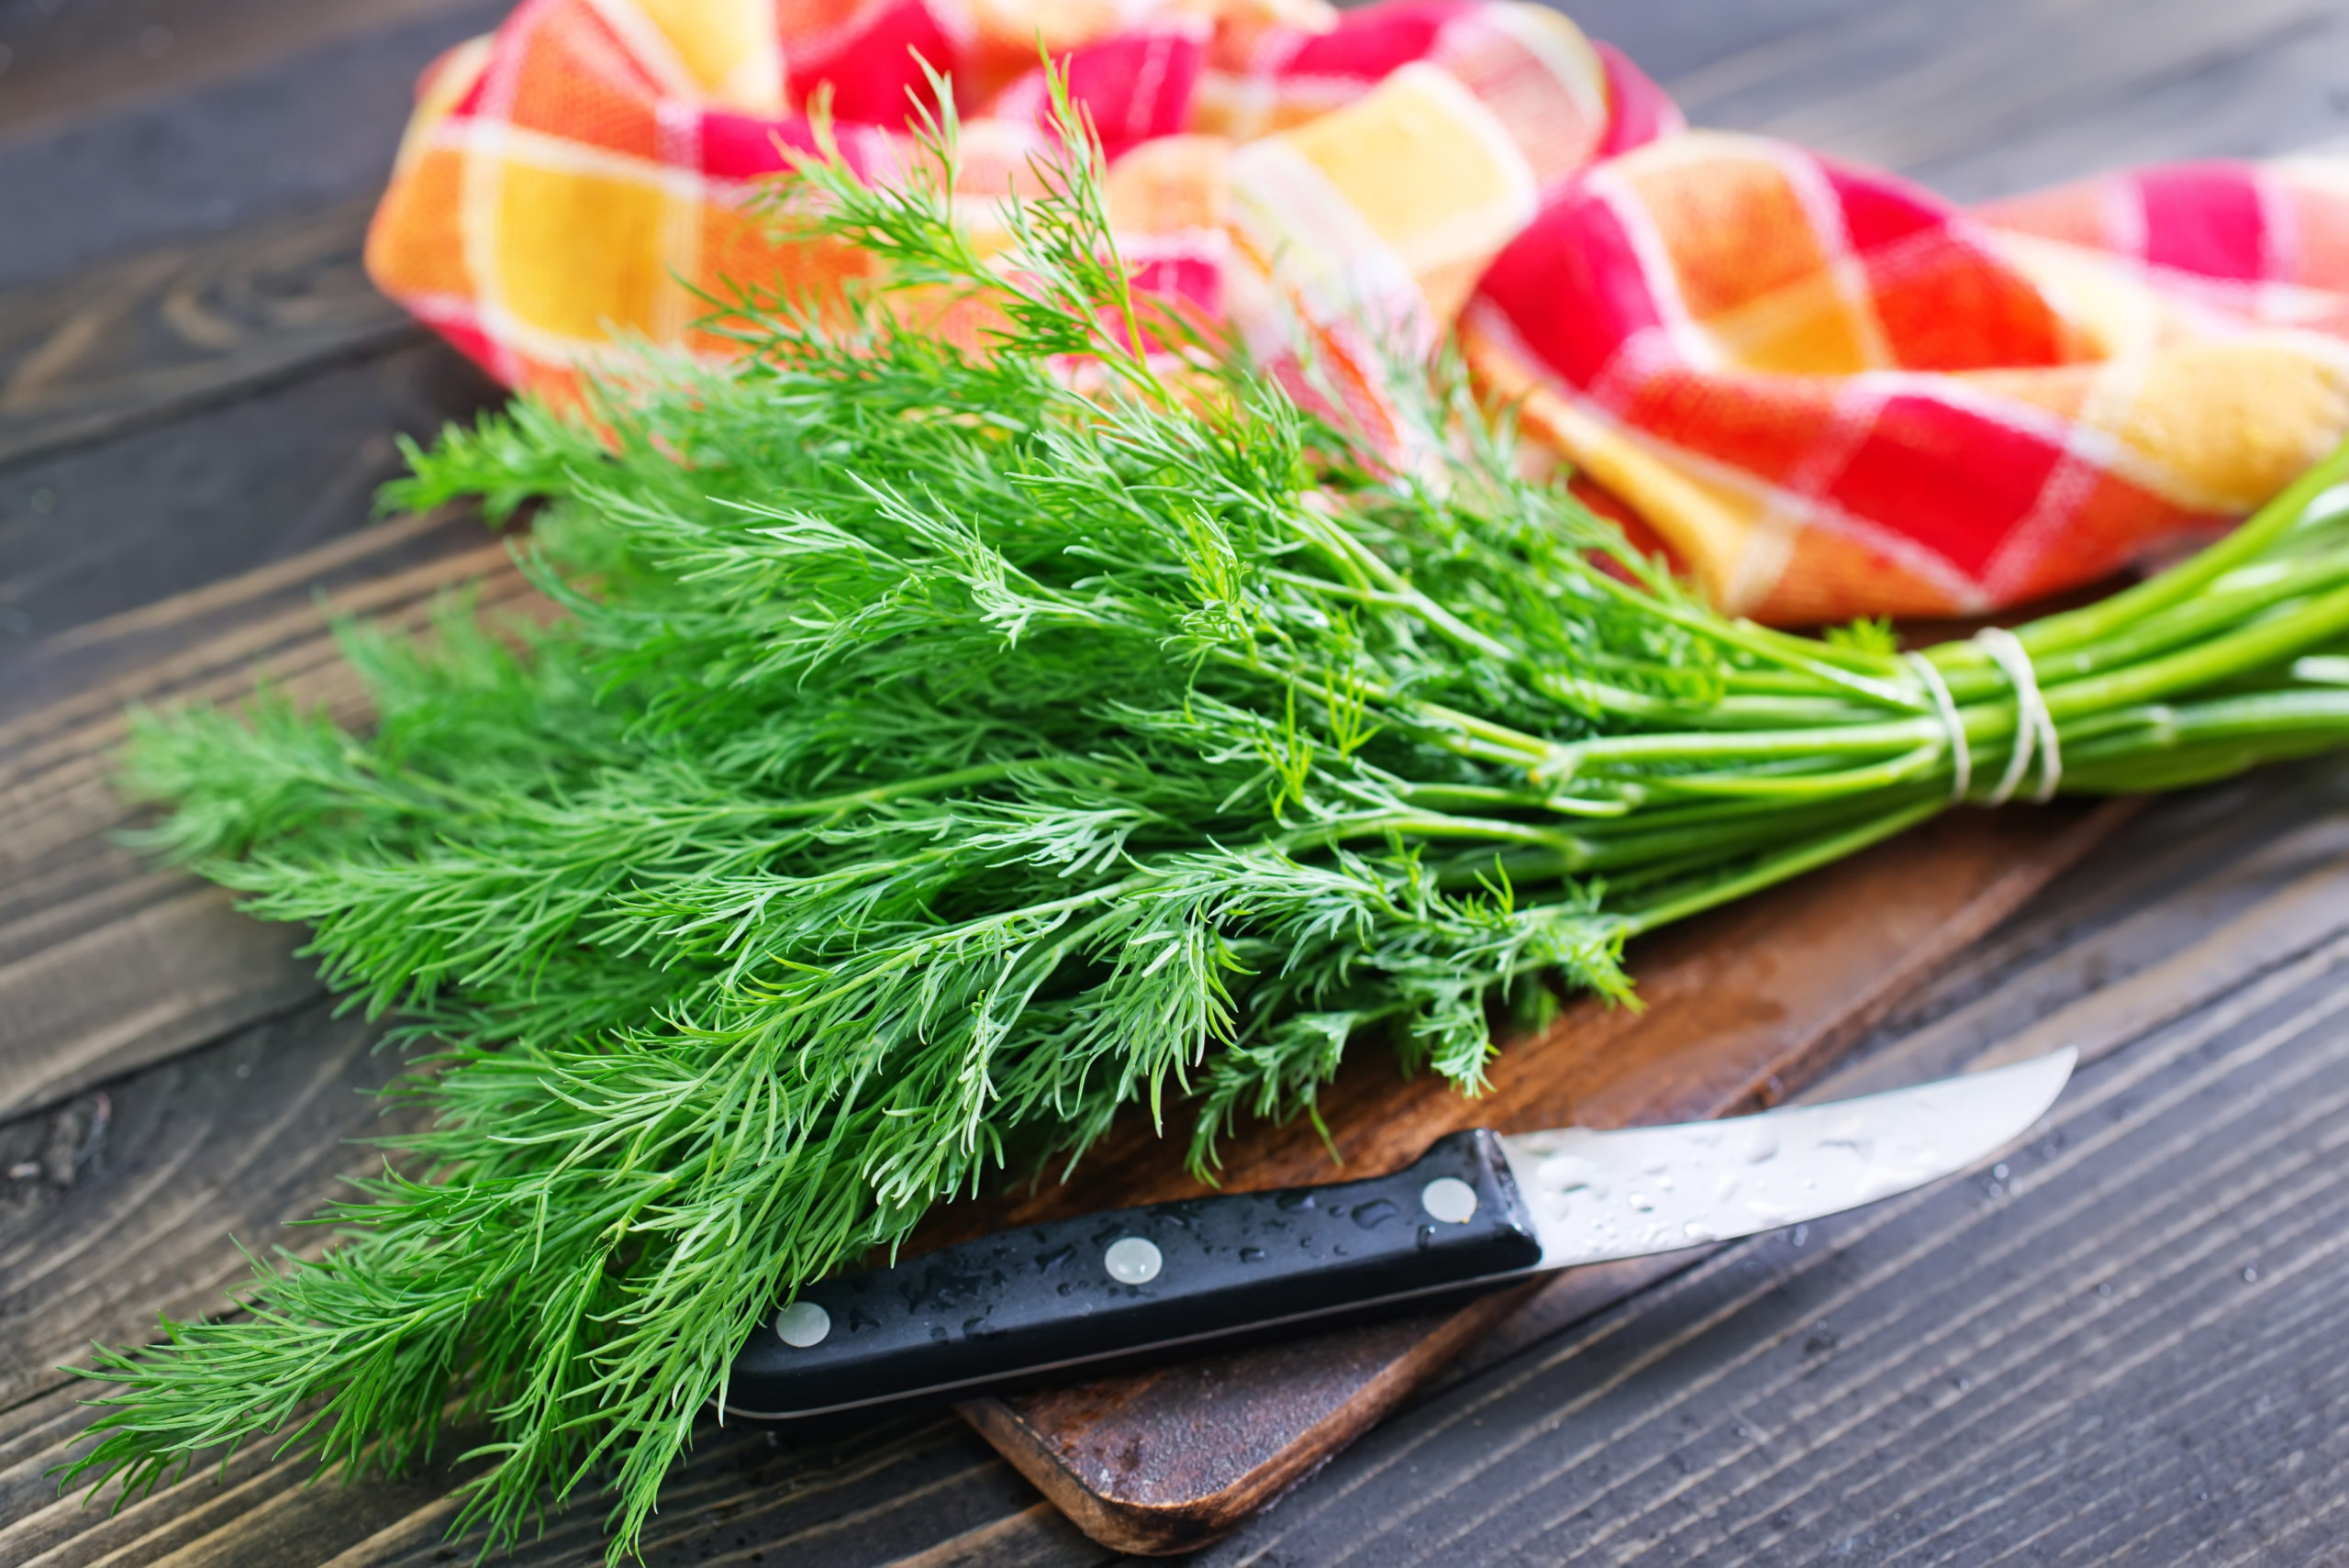 fresh dill and a knive on w ooden chopping board and pink/orange napkin